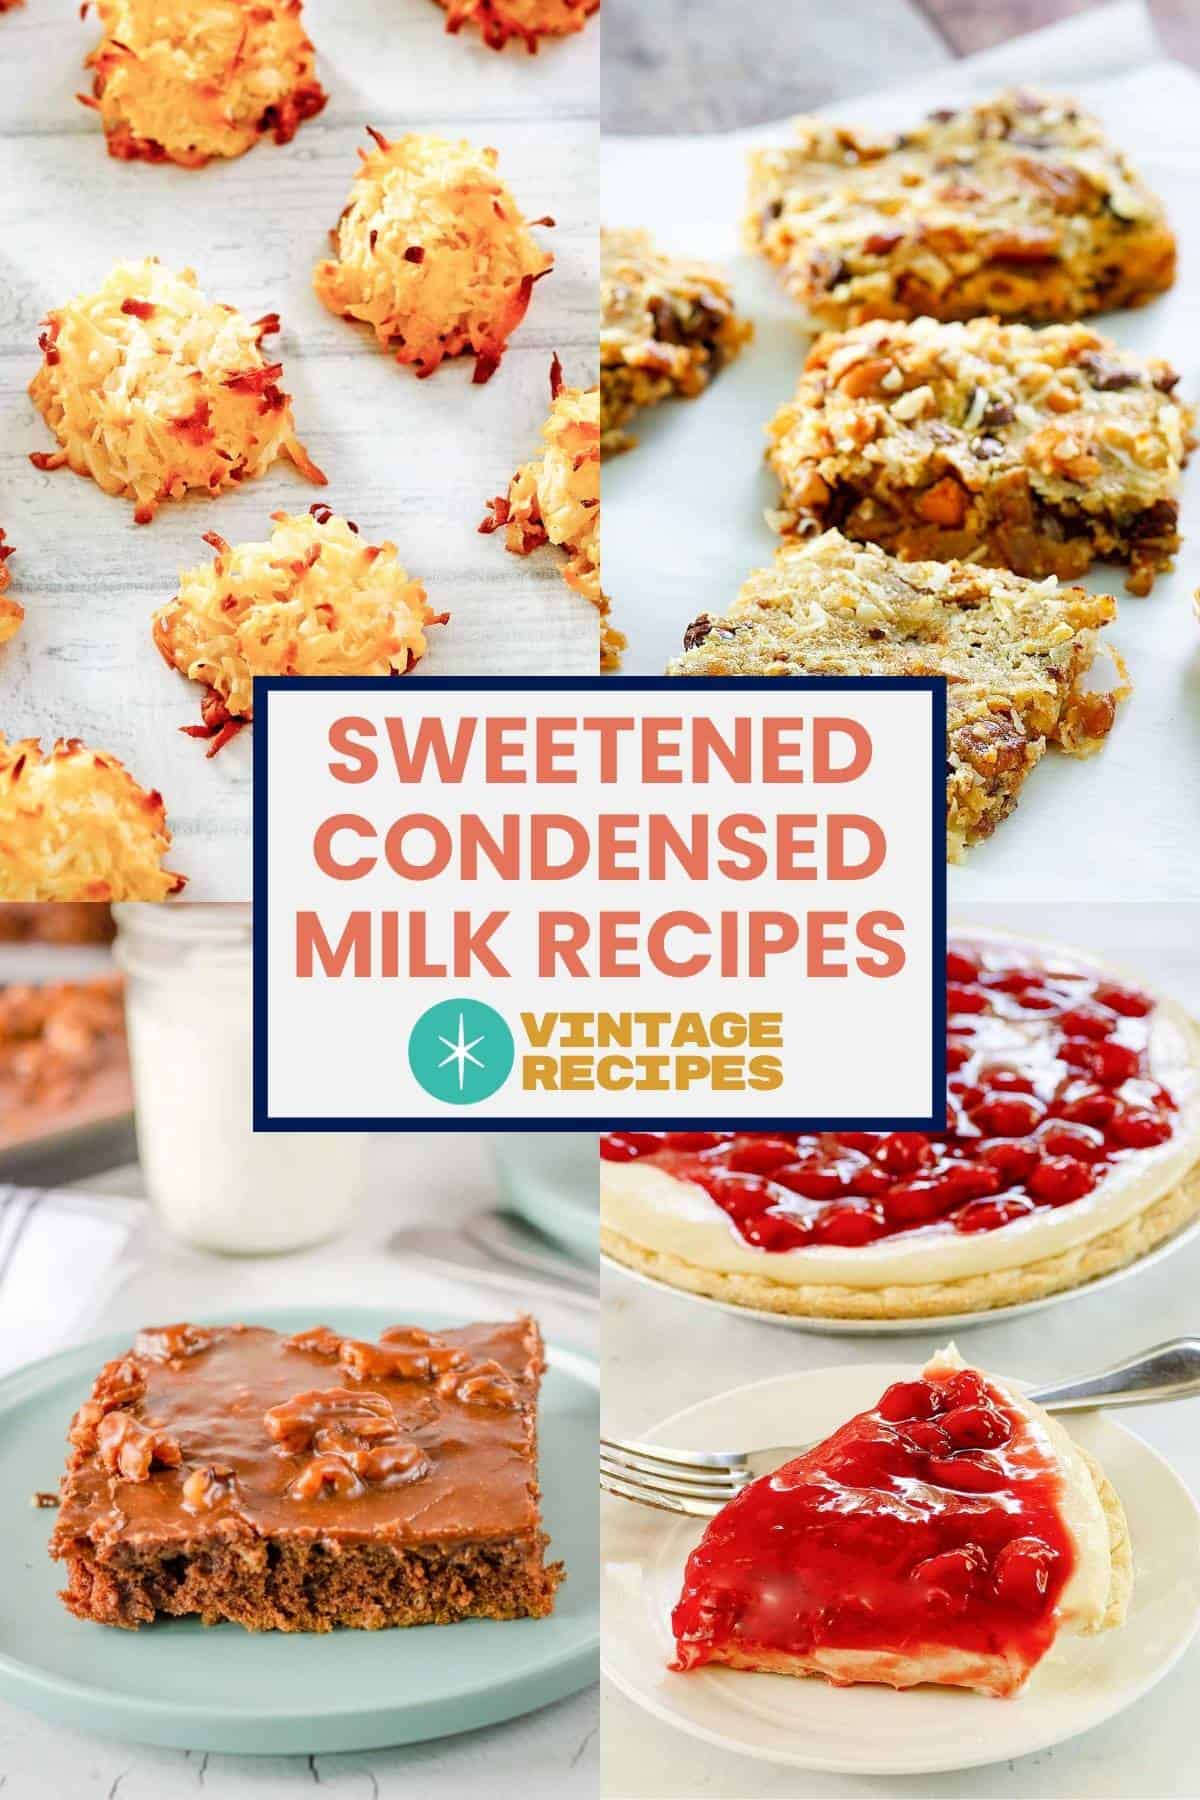 Cookies, bars, cakes, and pies made with sweetened condensed milk.